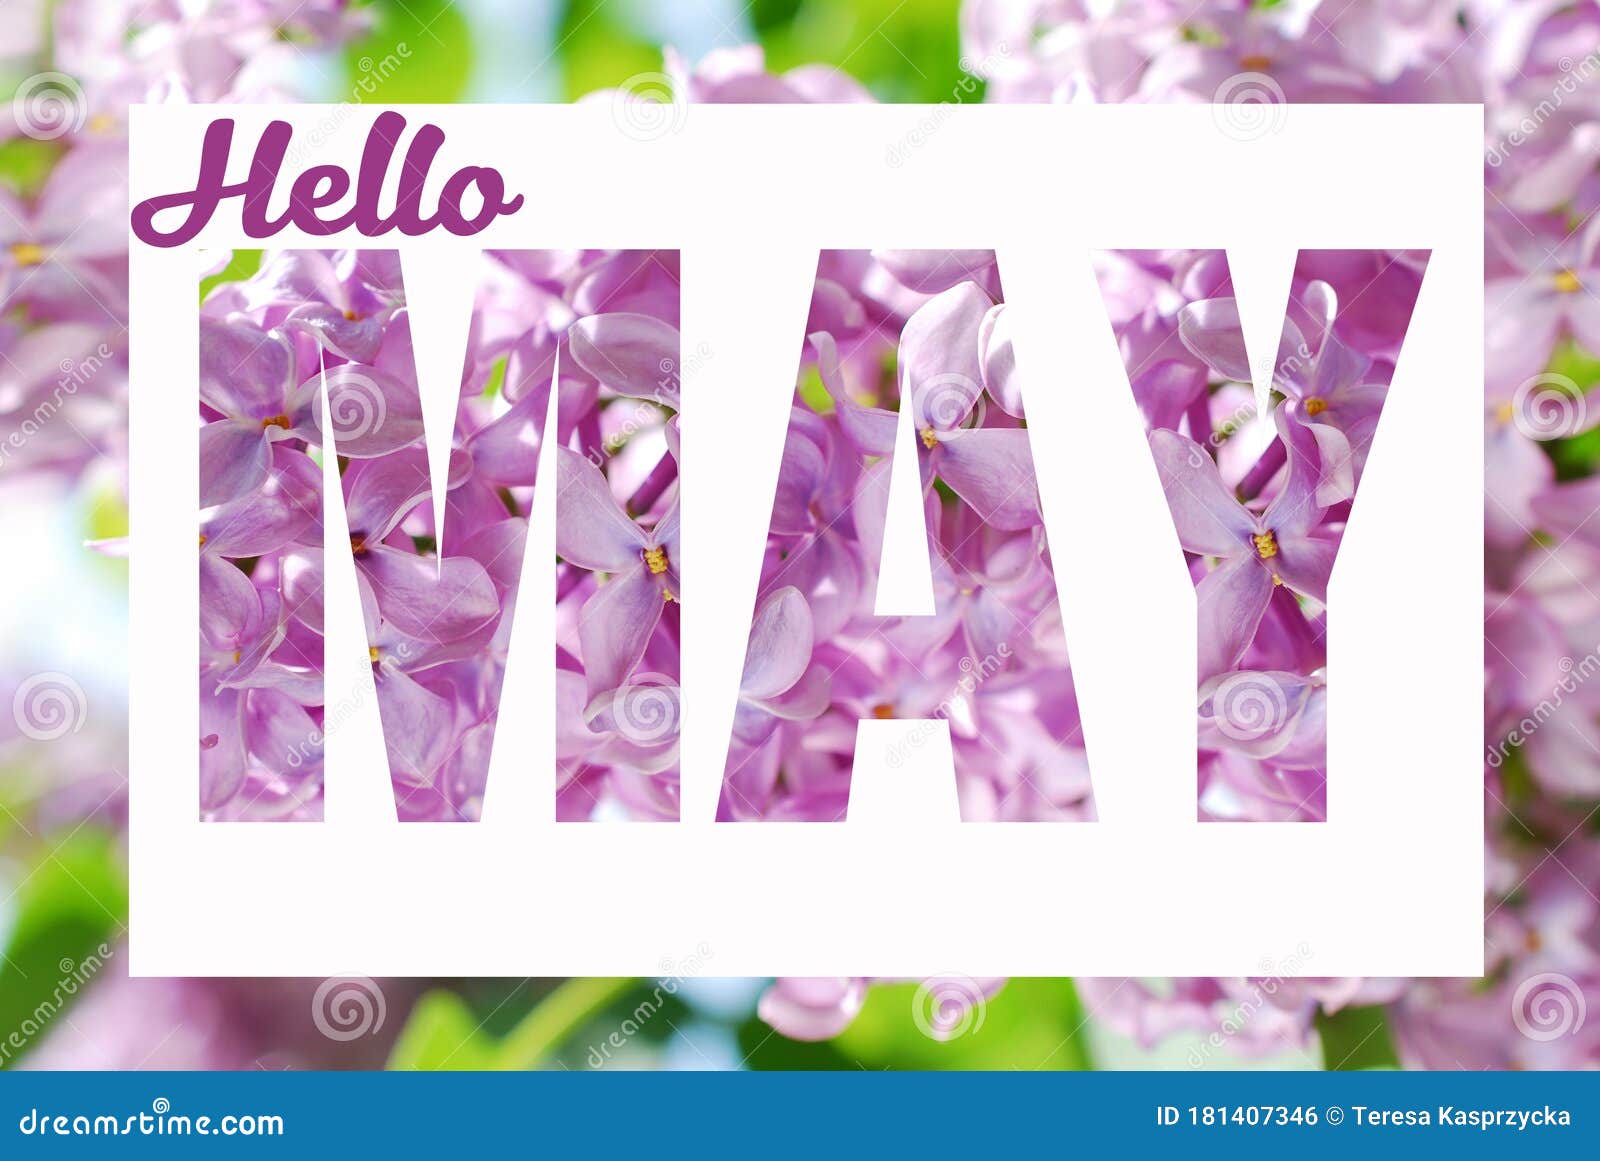 hello may background